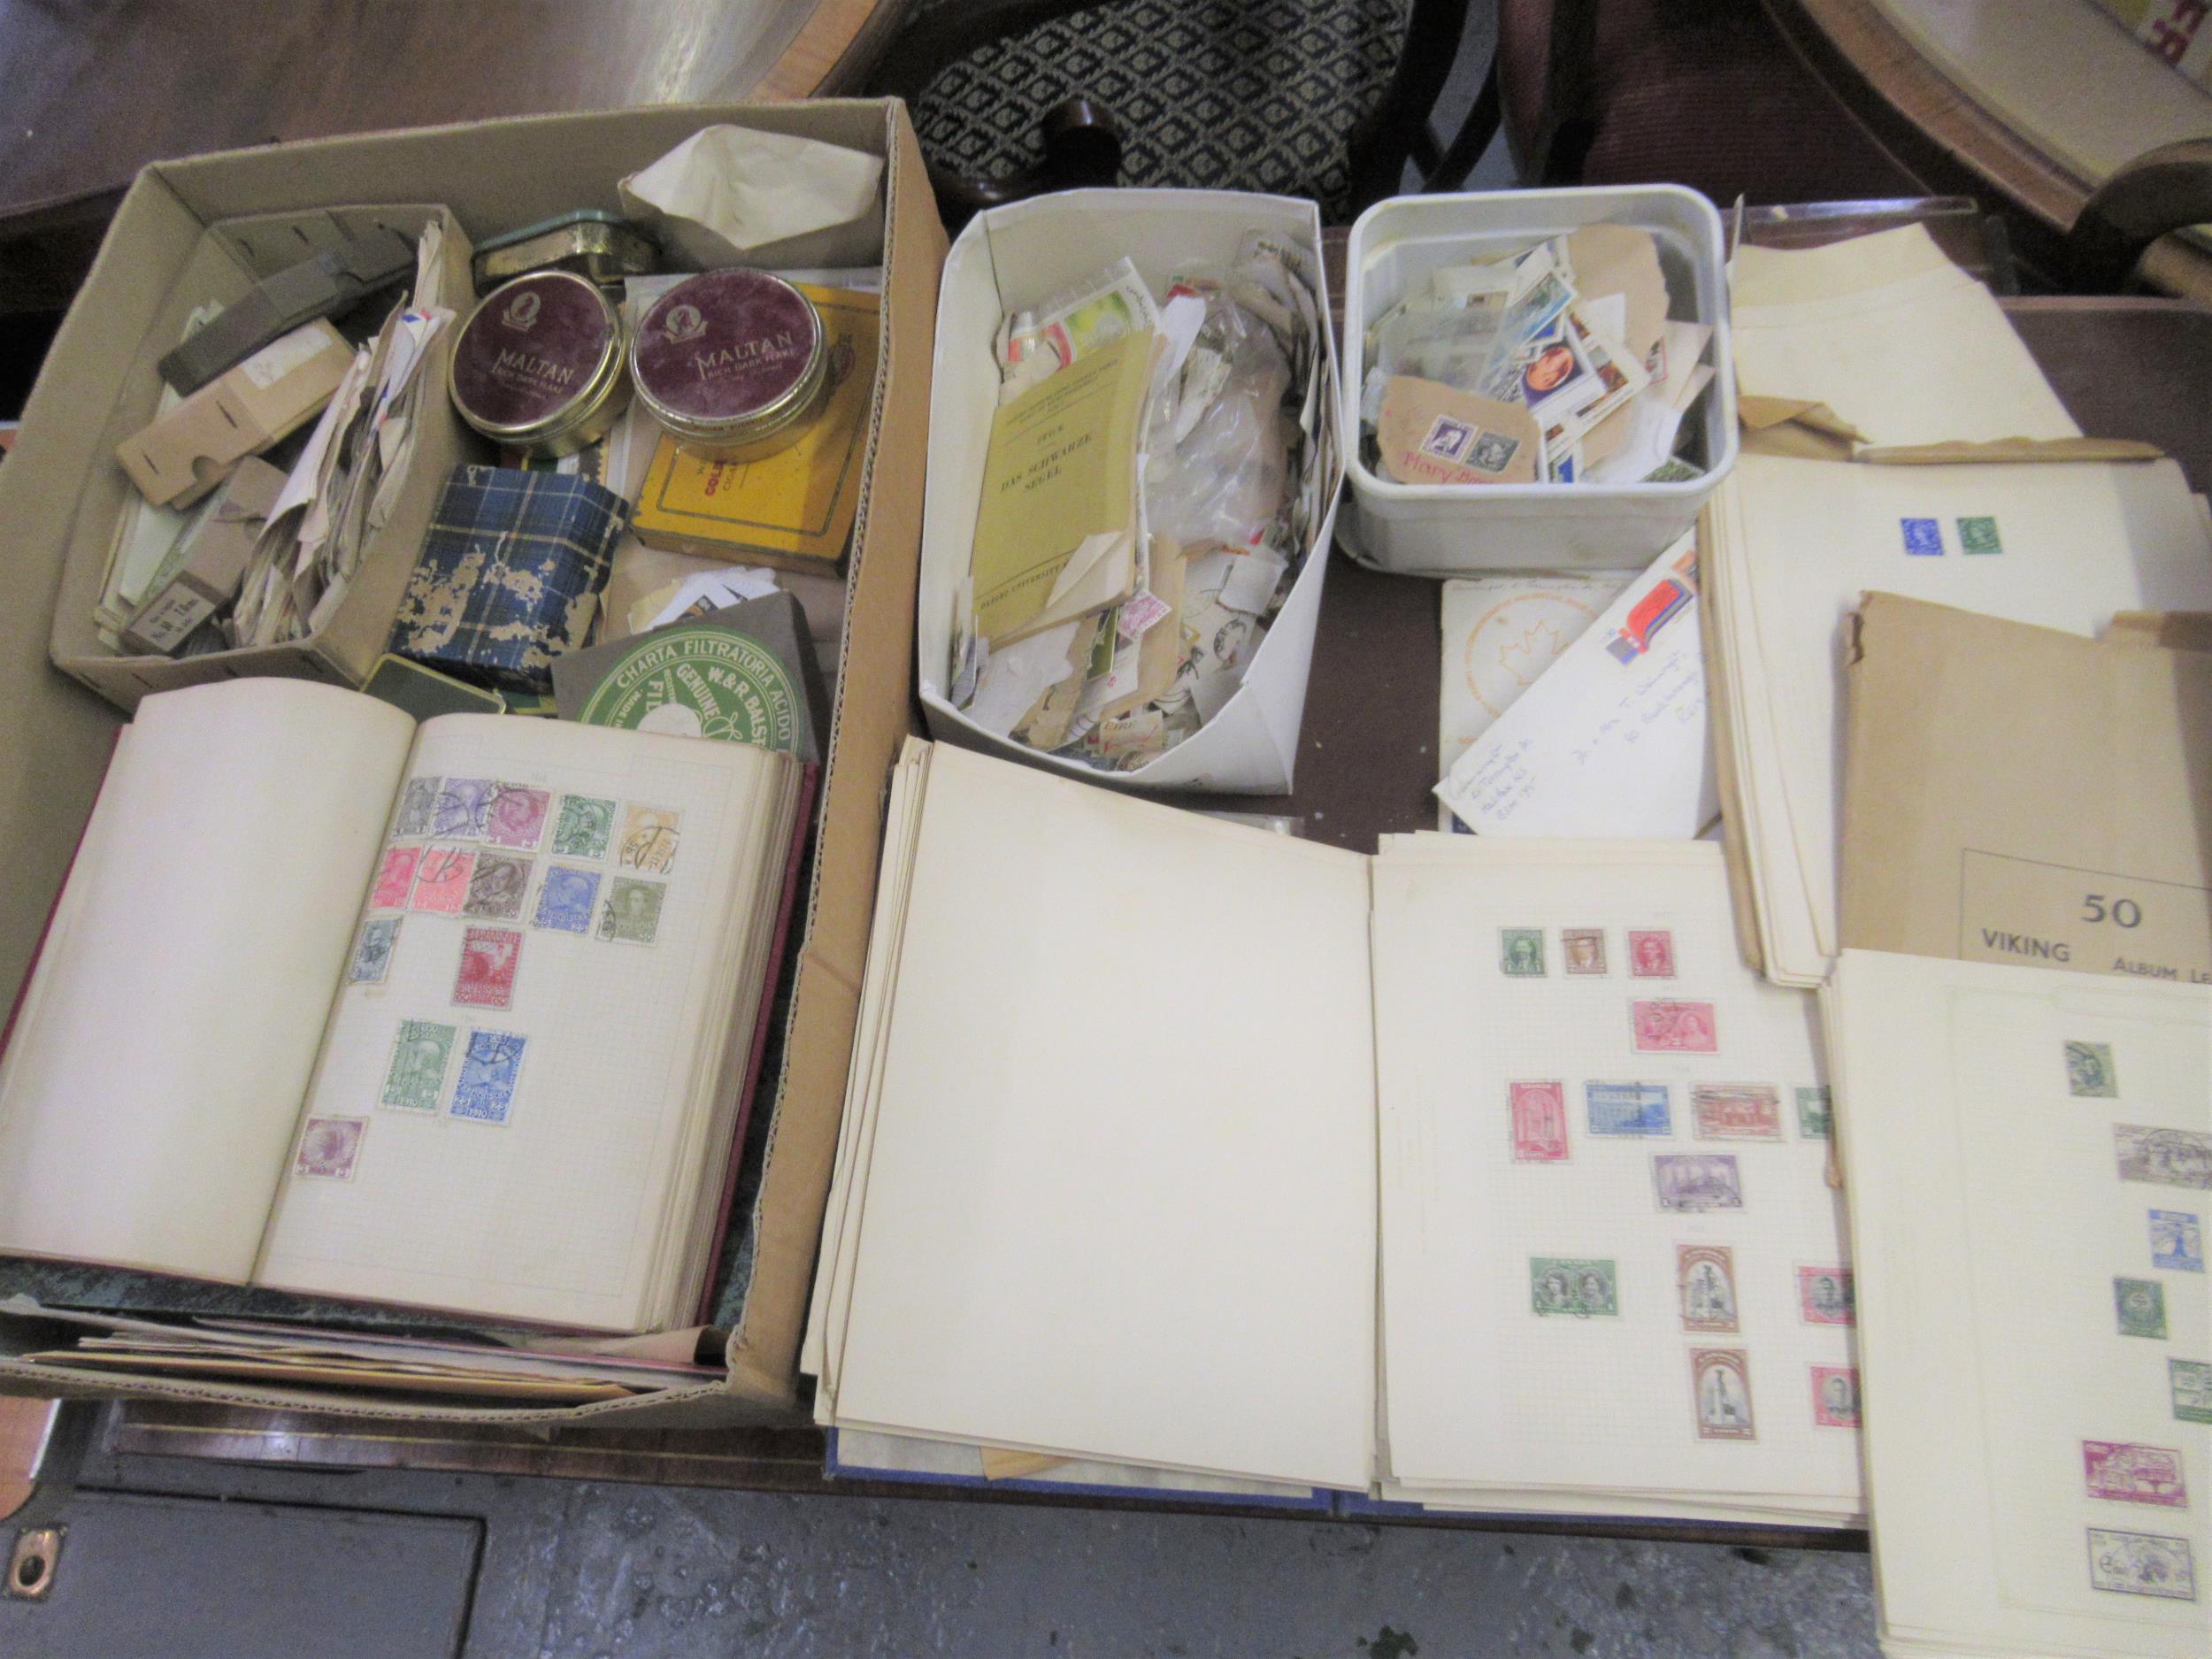 Box containing a large quantity of various World stamps, including United States presidents in